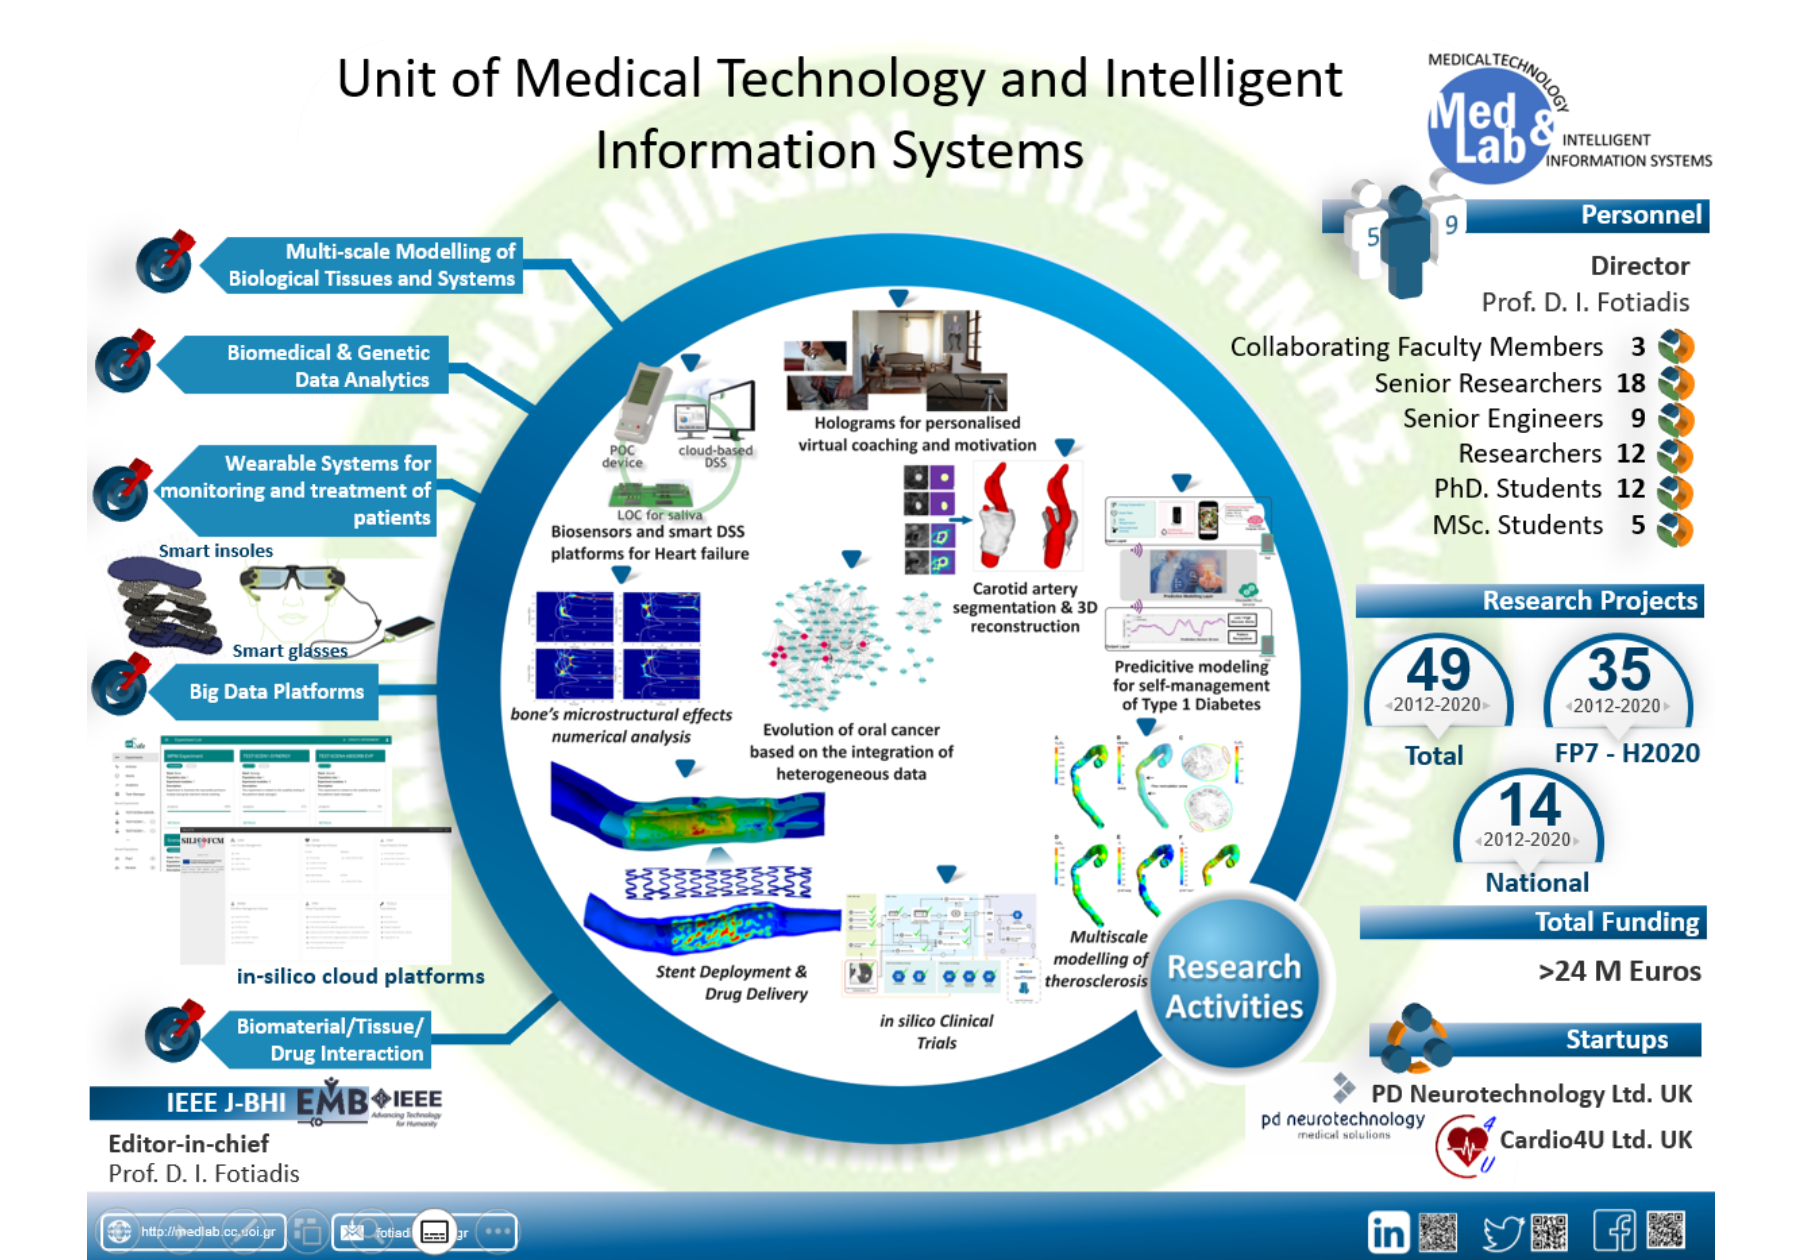 Unit of Medical Technology and Intelligent Information Systems